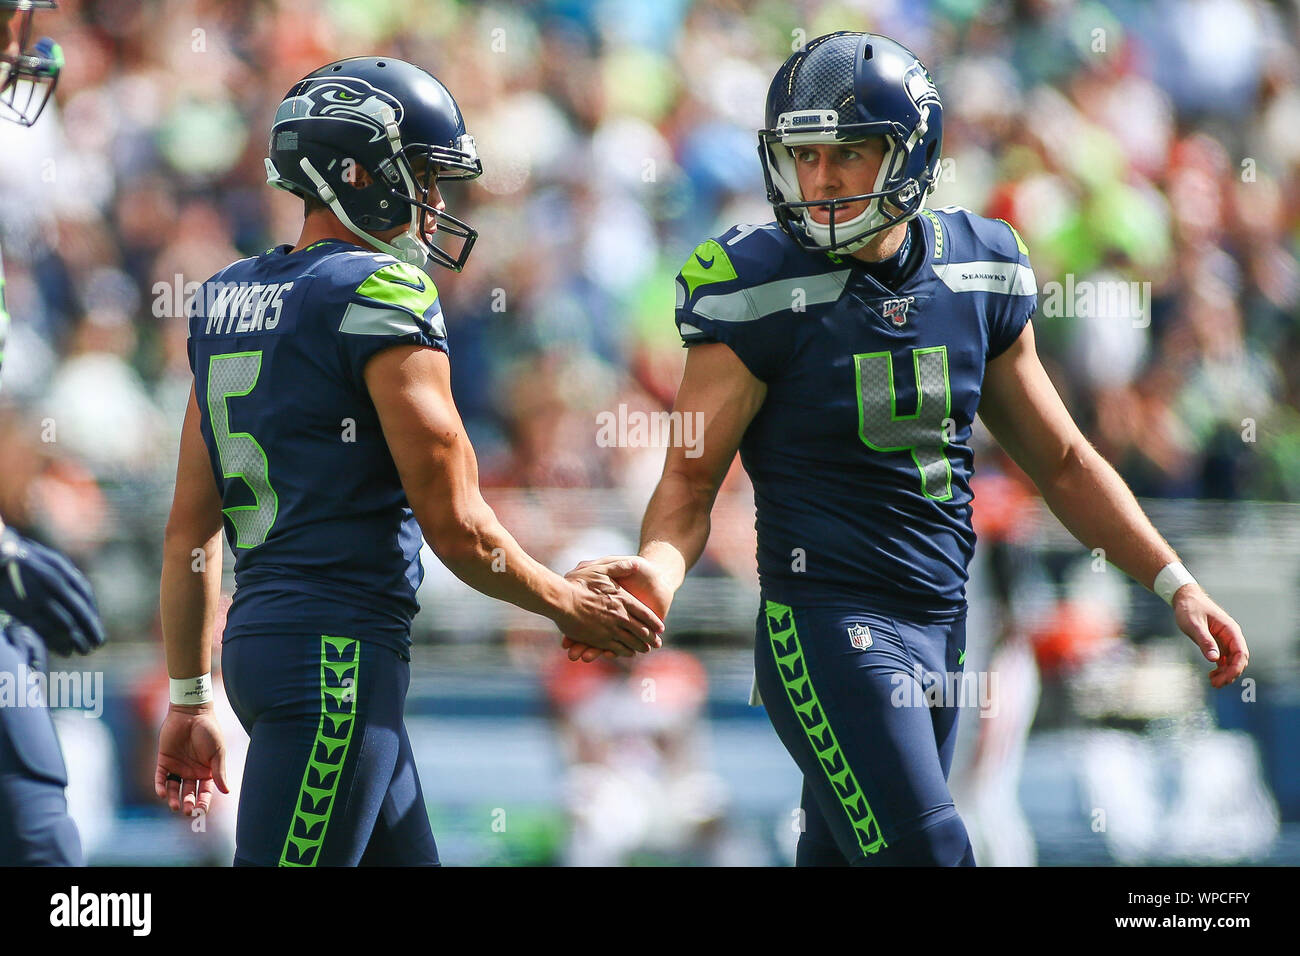 Seattle, WA, USA. 8th Sep, 2019. Seattle Seahawks punter Michael Dickson (4) and Seattle Seahawks kicker Jason Myers (5) high five after a made PAT during a game between the Cincinnati Bengals and Seattle Seahawks at CenturyLink Field in Seattle, WA. The Seahawks won 21-20. Sean Brown/CSM/Alamy Live News Stock Photo